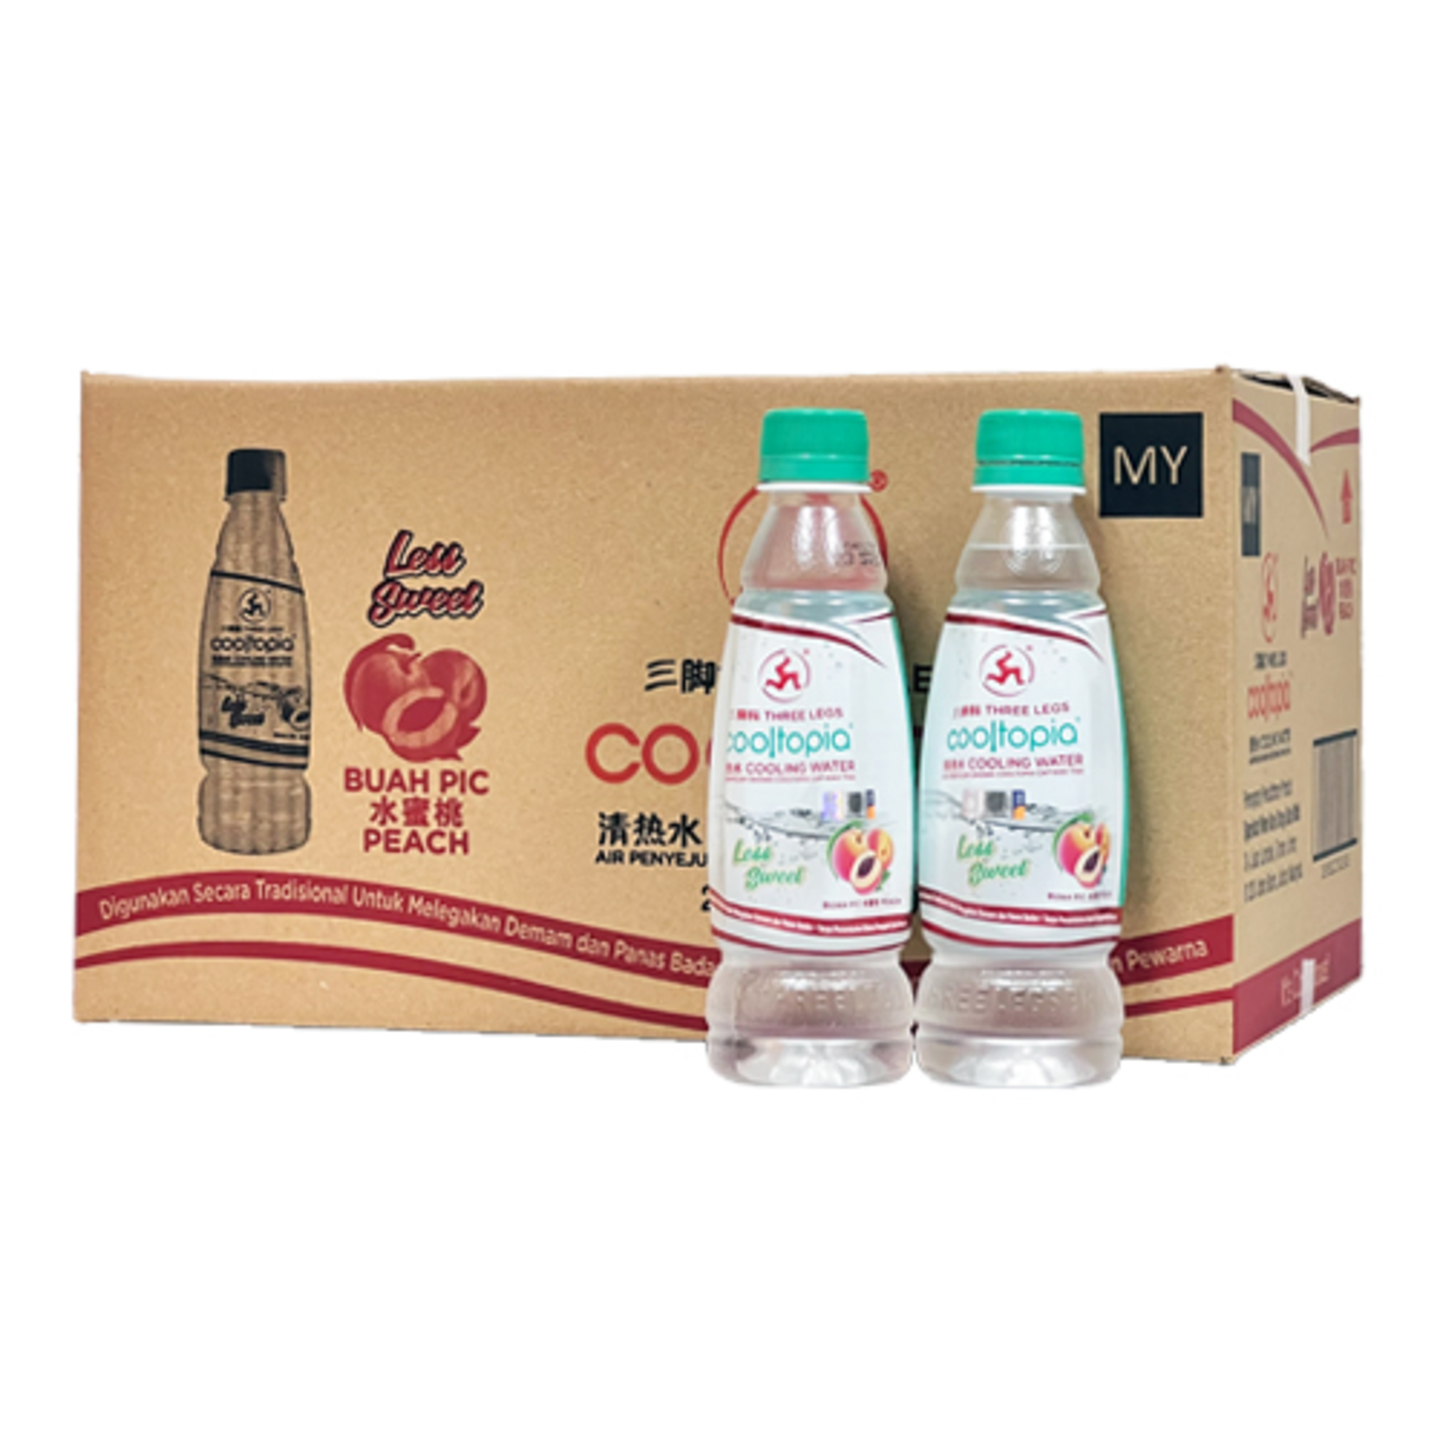 THREE LEGS COOLTOPIA COOLING WATER - PEACH LESS SWEET - 320ML x 24